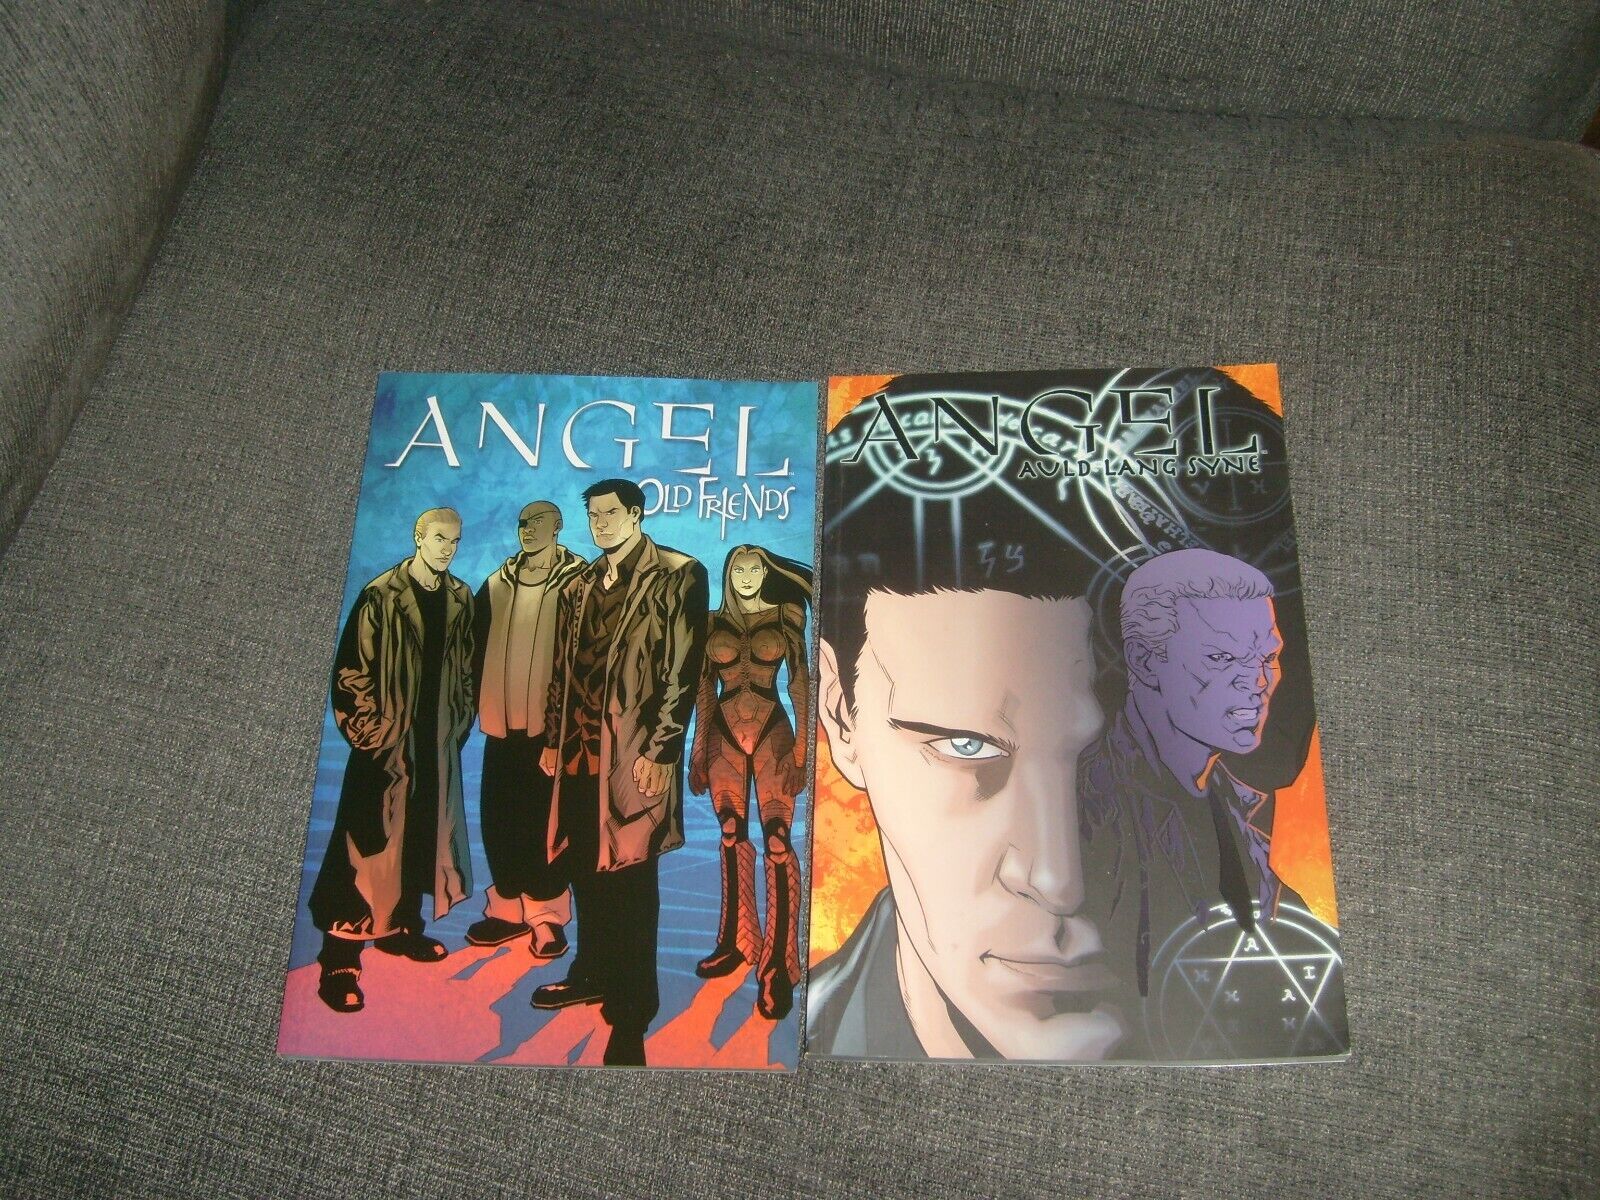 Lot of 2 Angel Comics Old Friends & Auld Lang Syne- Whedon 